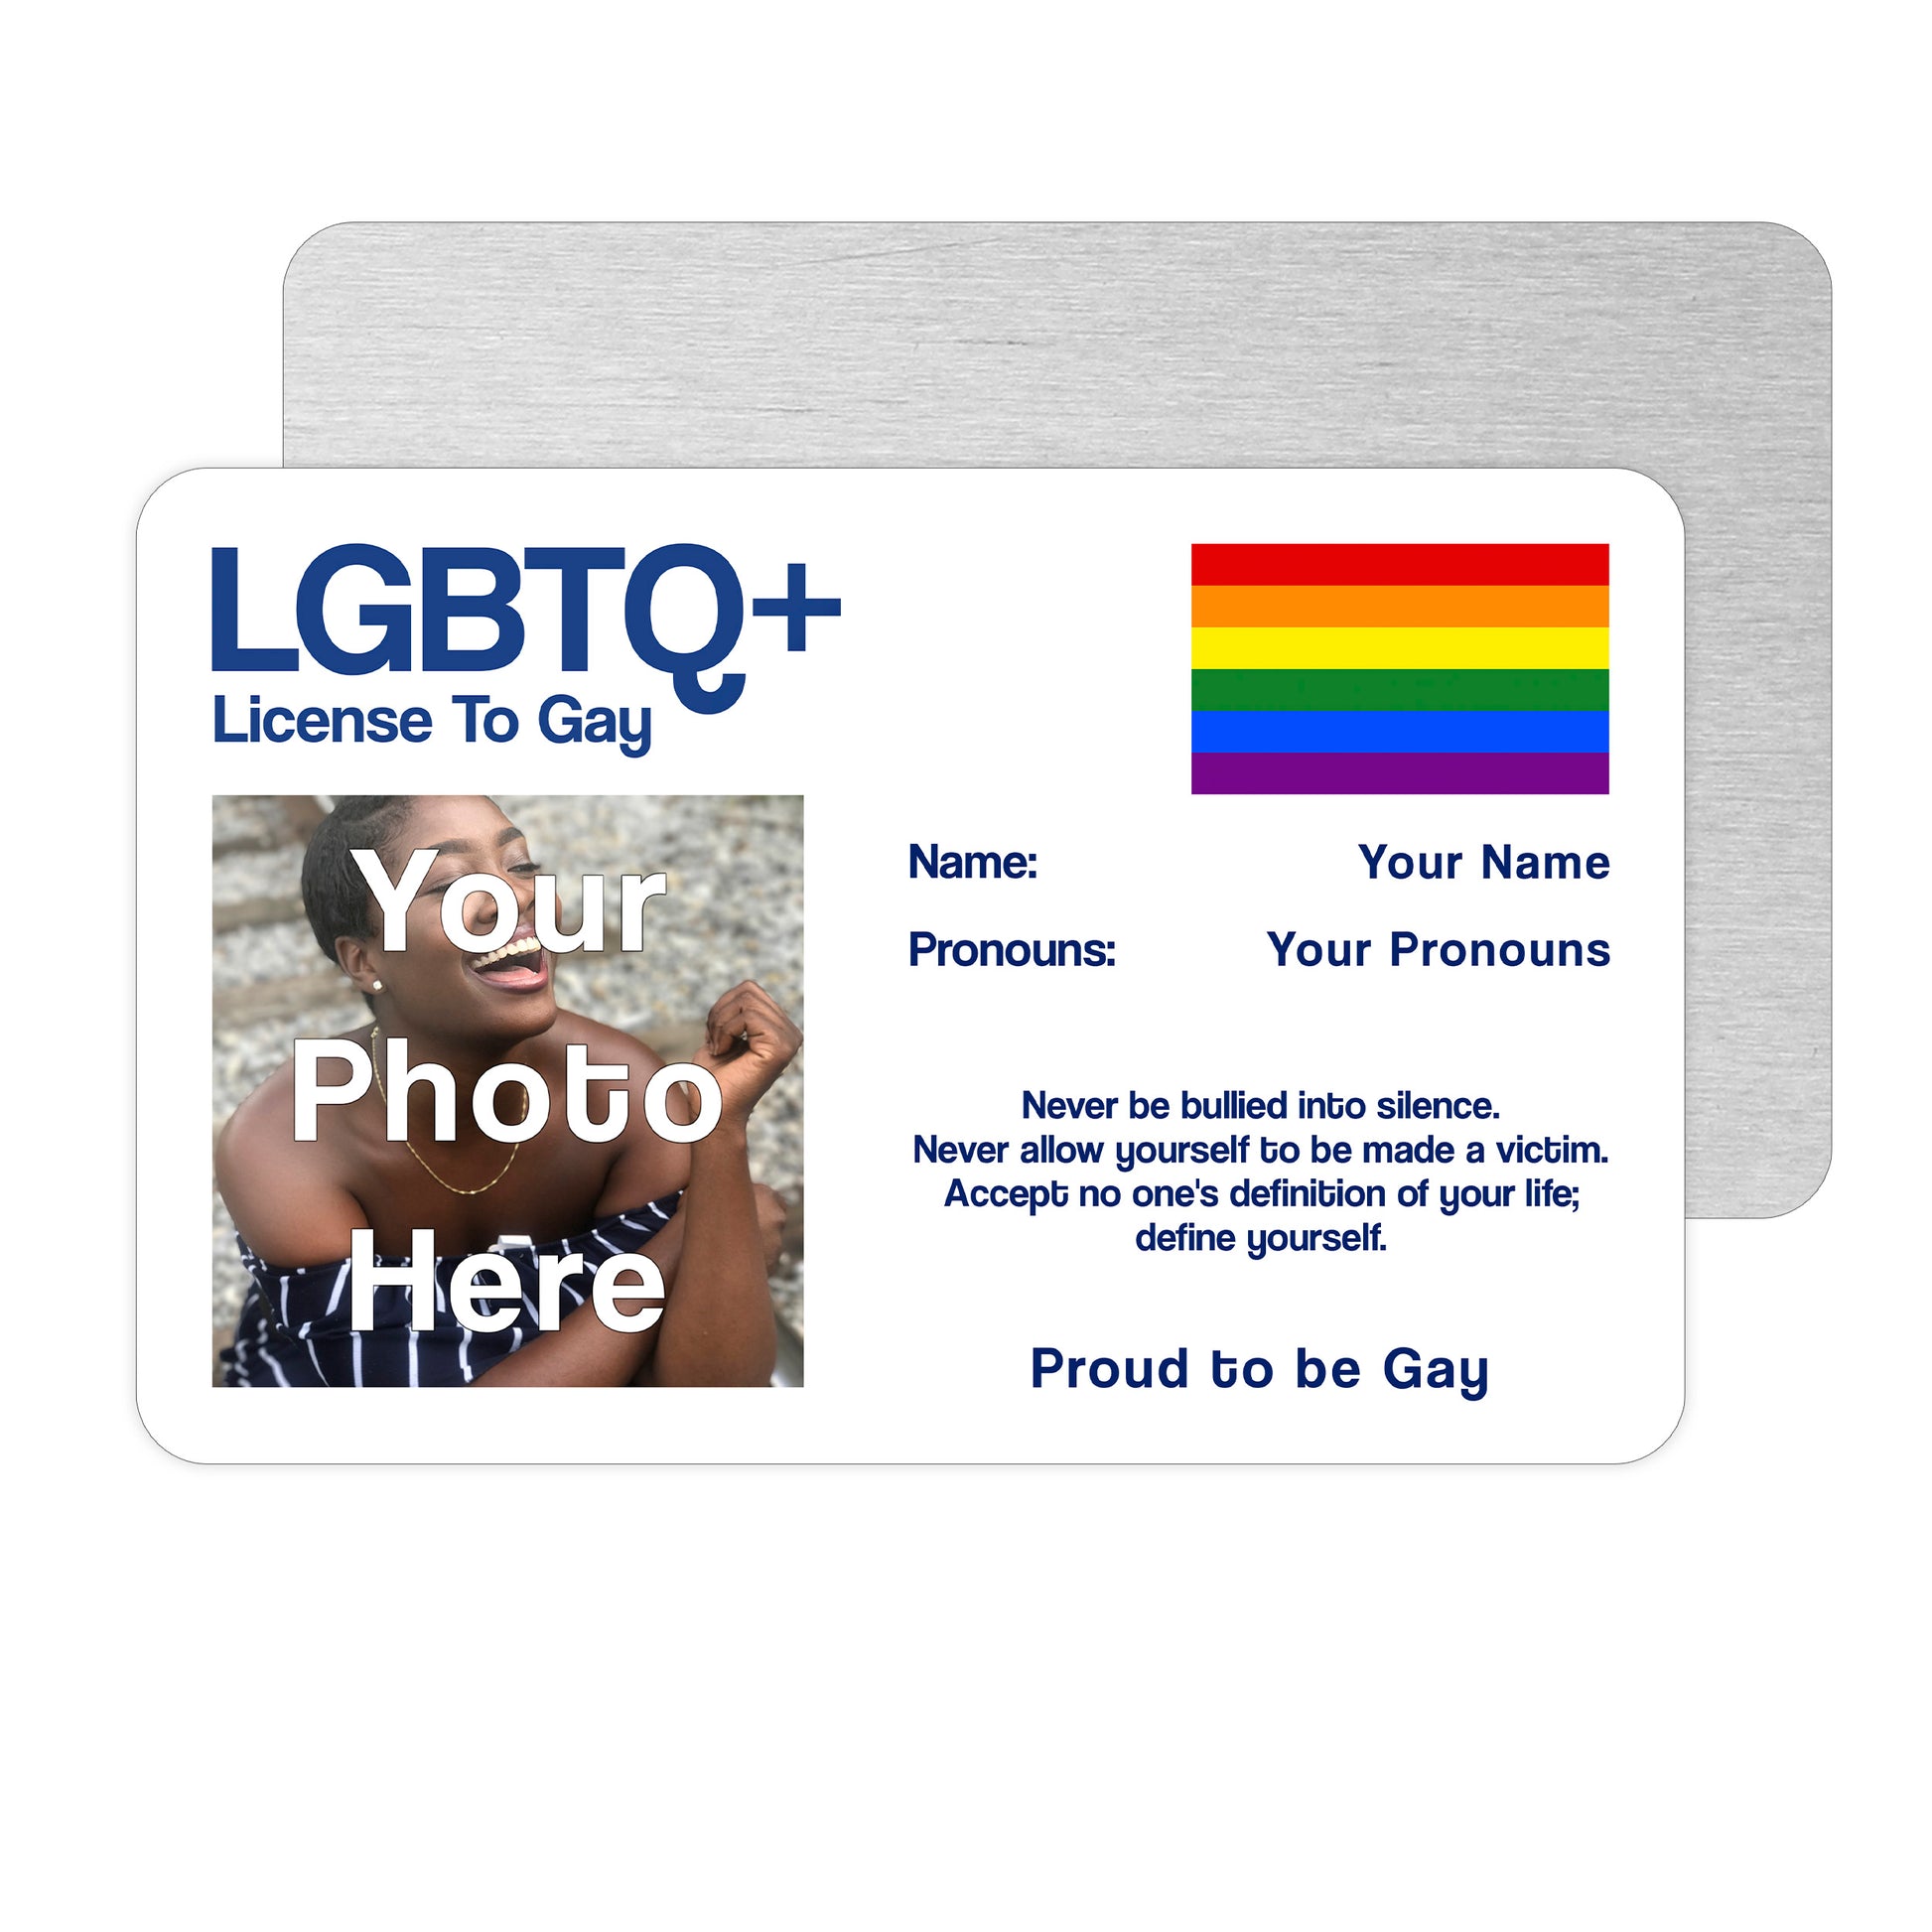 Aluminium novelty License To Gay wallet card personalised with your photo, name, pronouns, and the classic gay pride rainbow pride flag